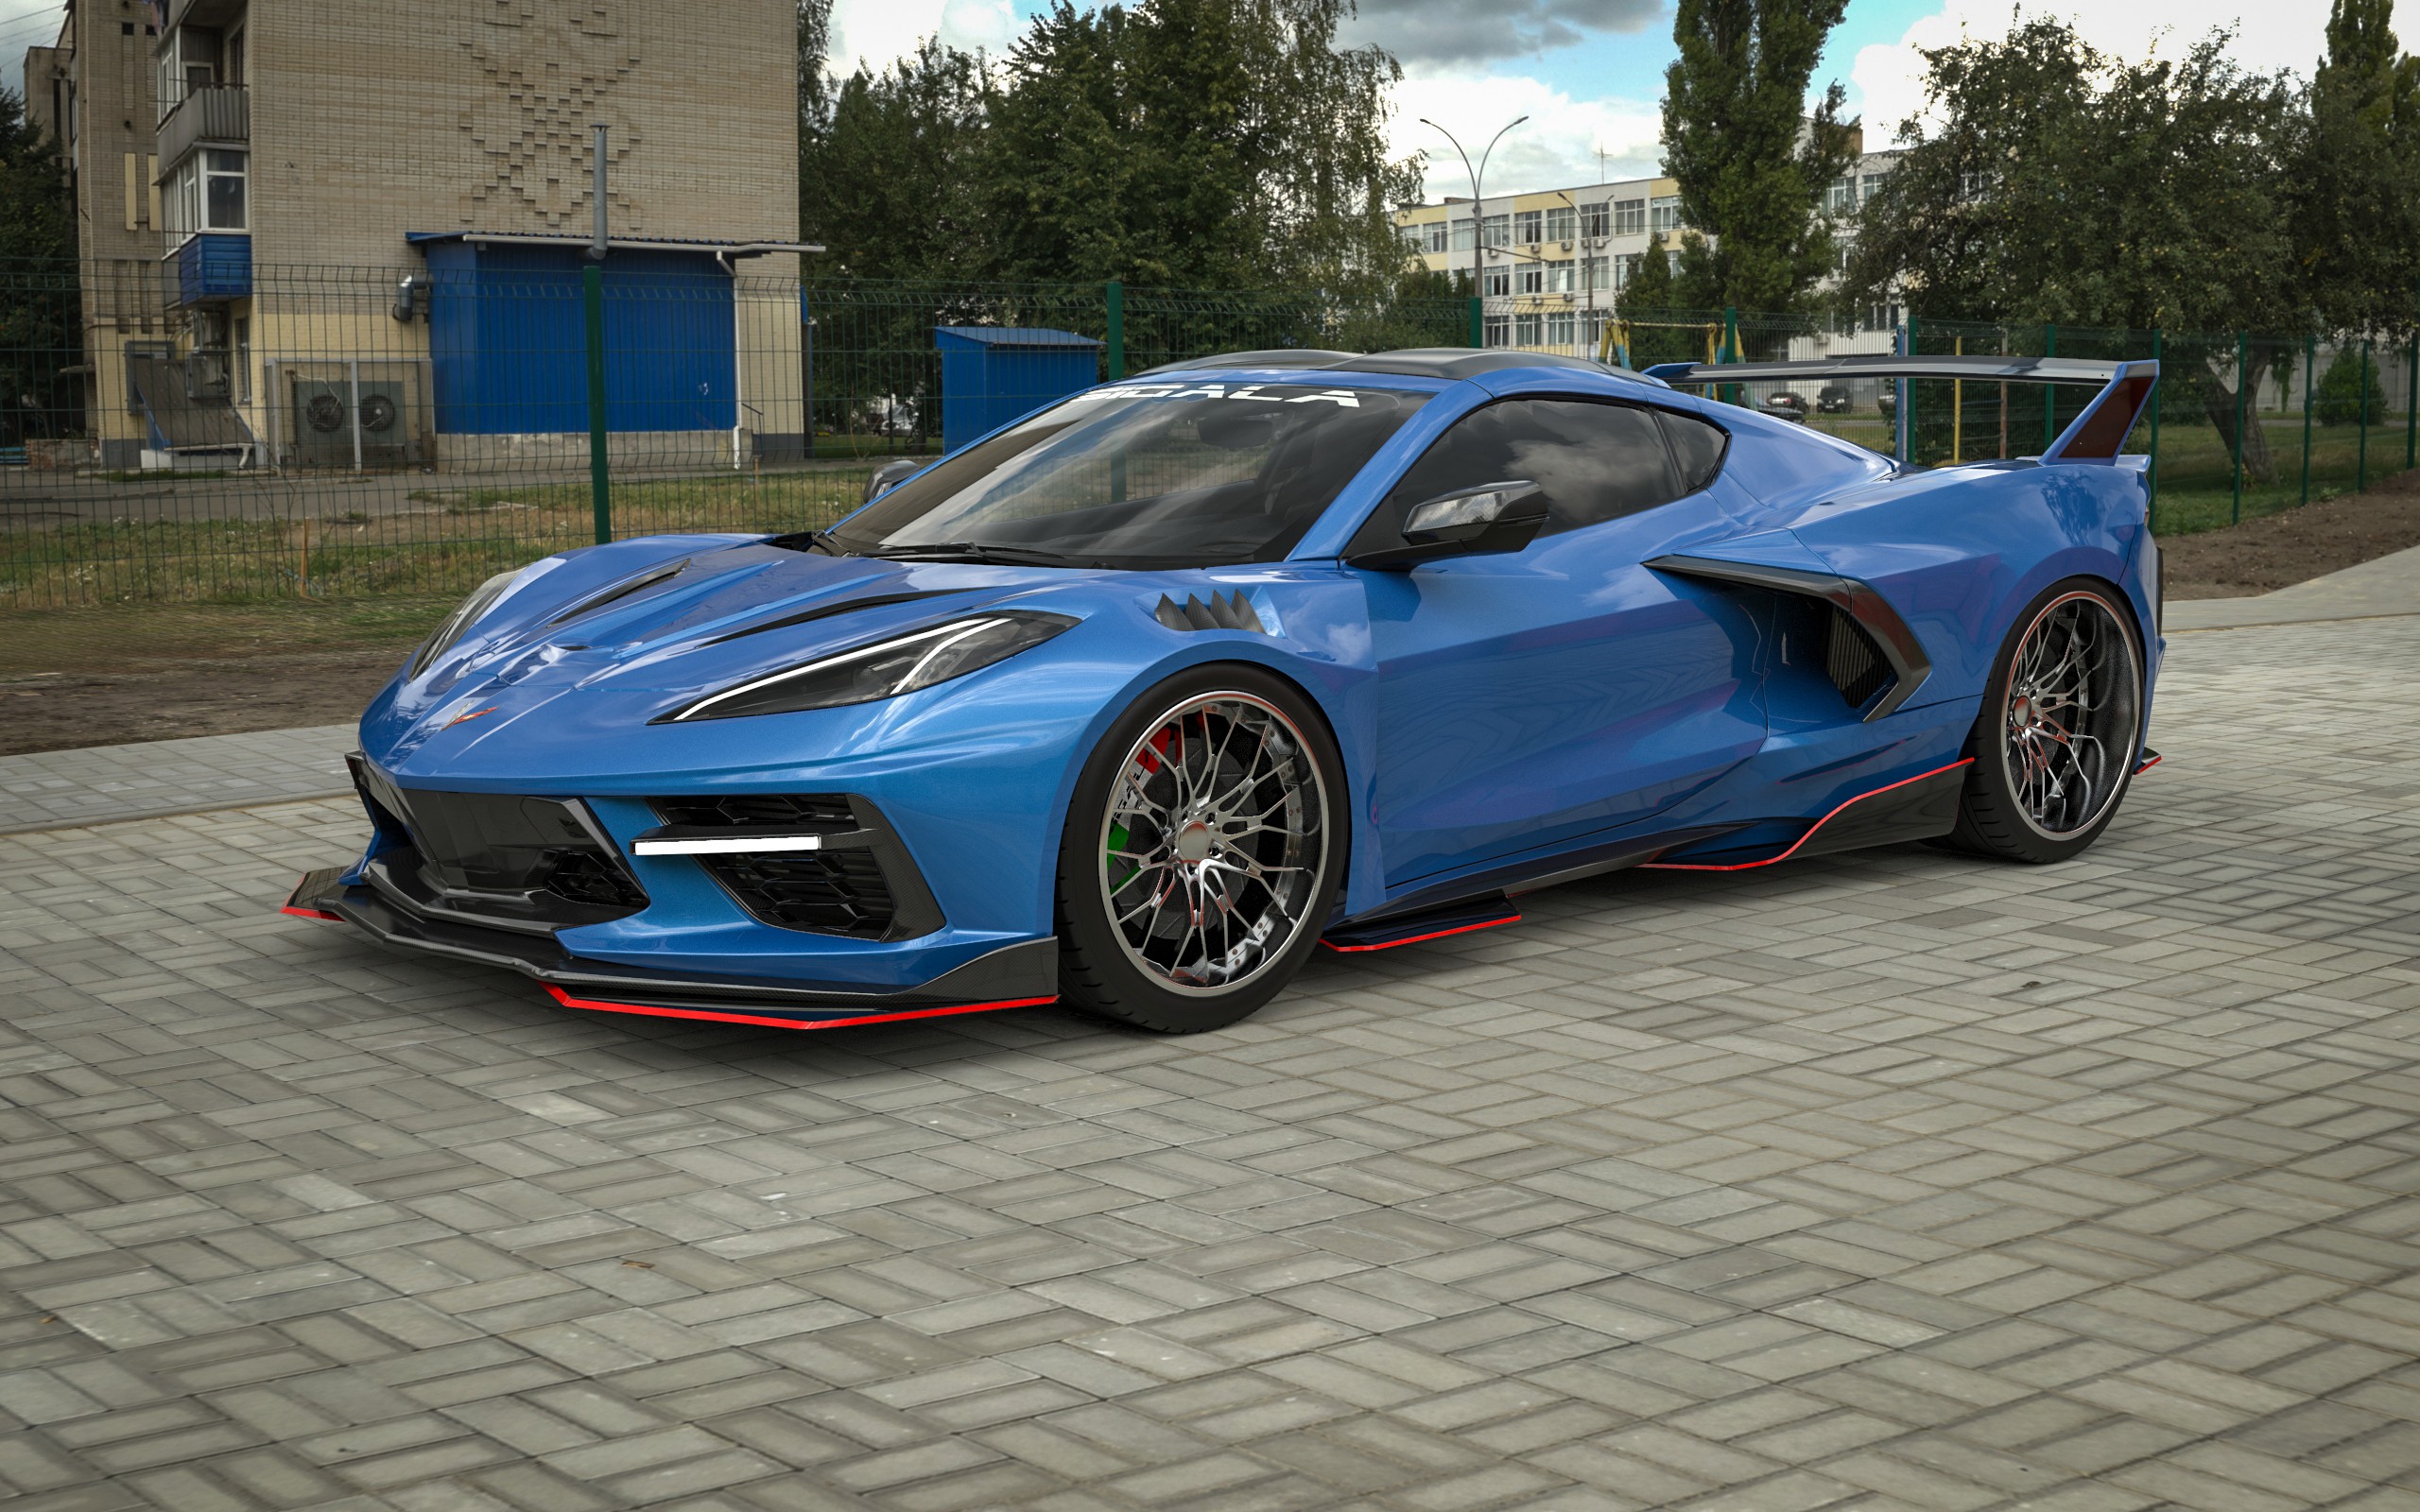 Widebody C8 Corvette "C8RR" by Sigala Designs Looks Awesome, Comi...